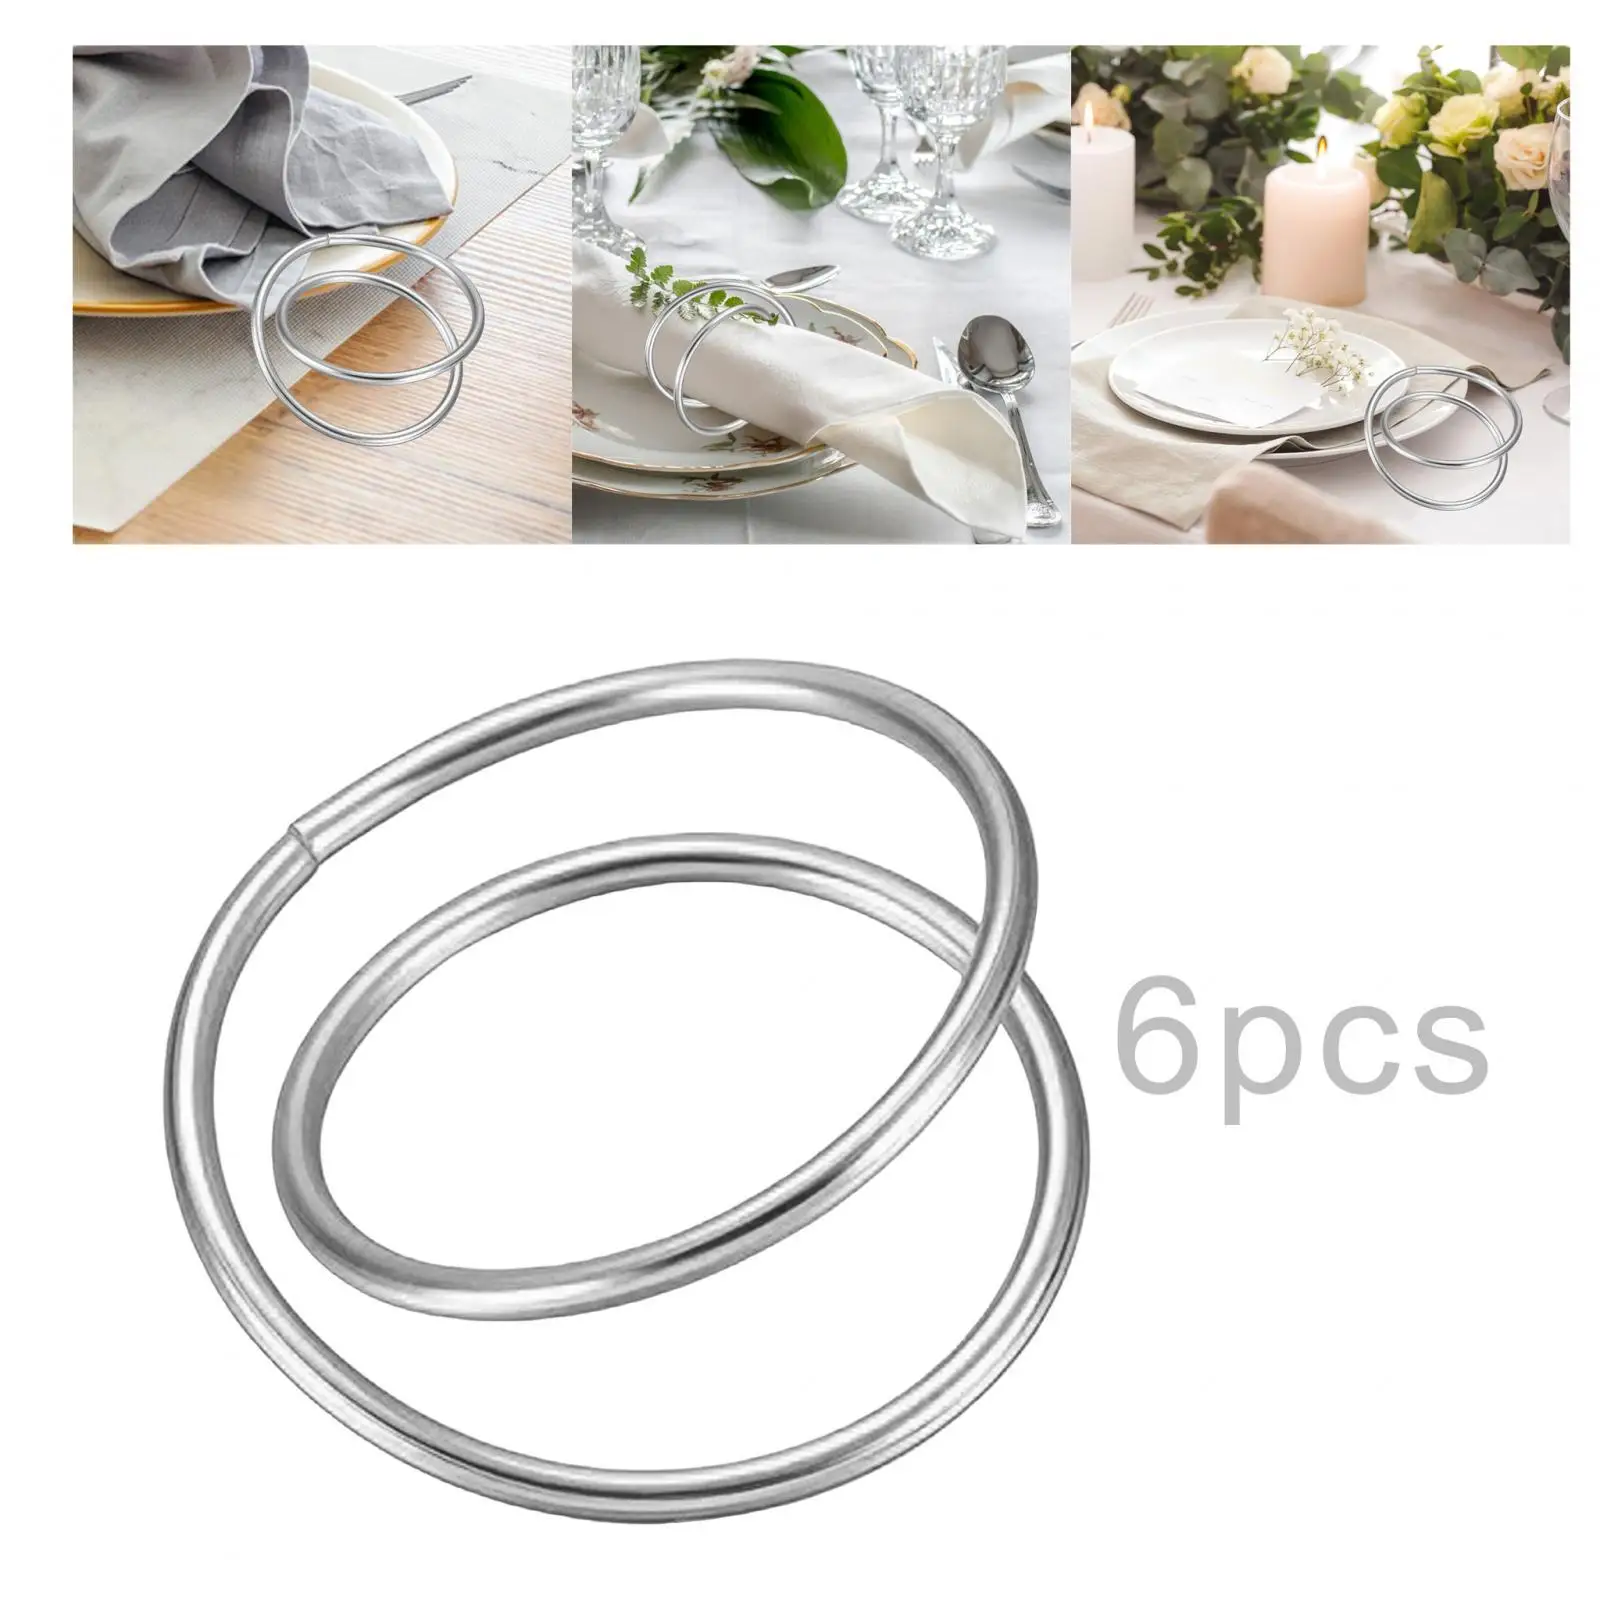 6x Napkin Rings Decoration Dining Table Napkin Buckle Metal Napkin Holder for Party Anniversary Festival Thanksgiving Hotel